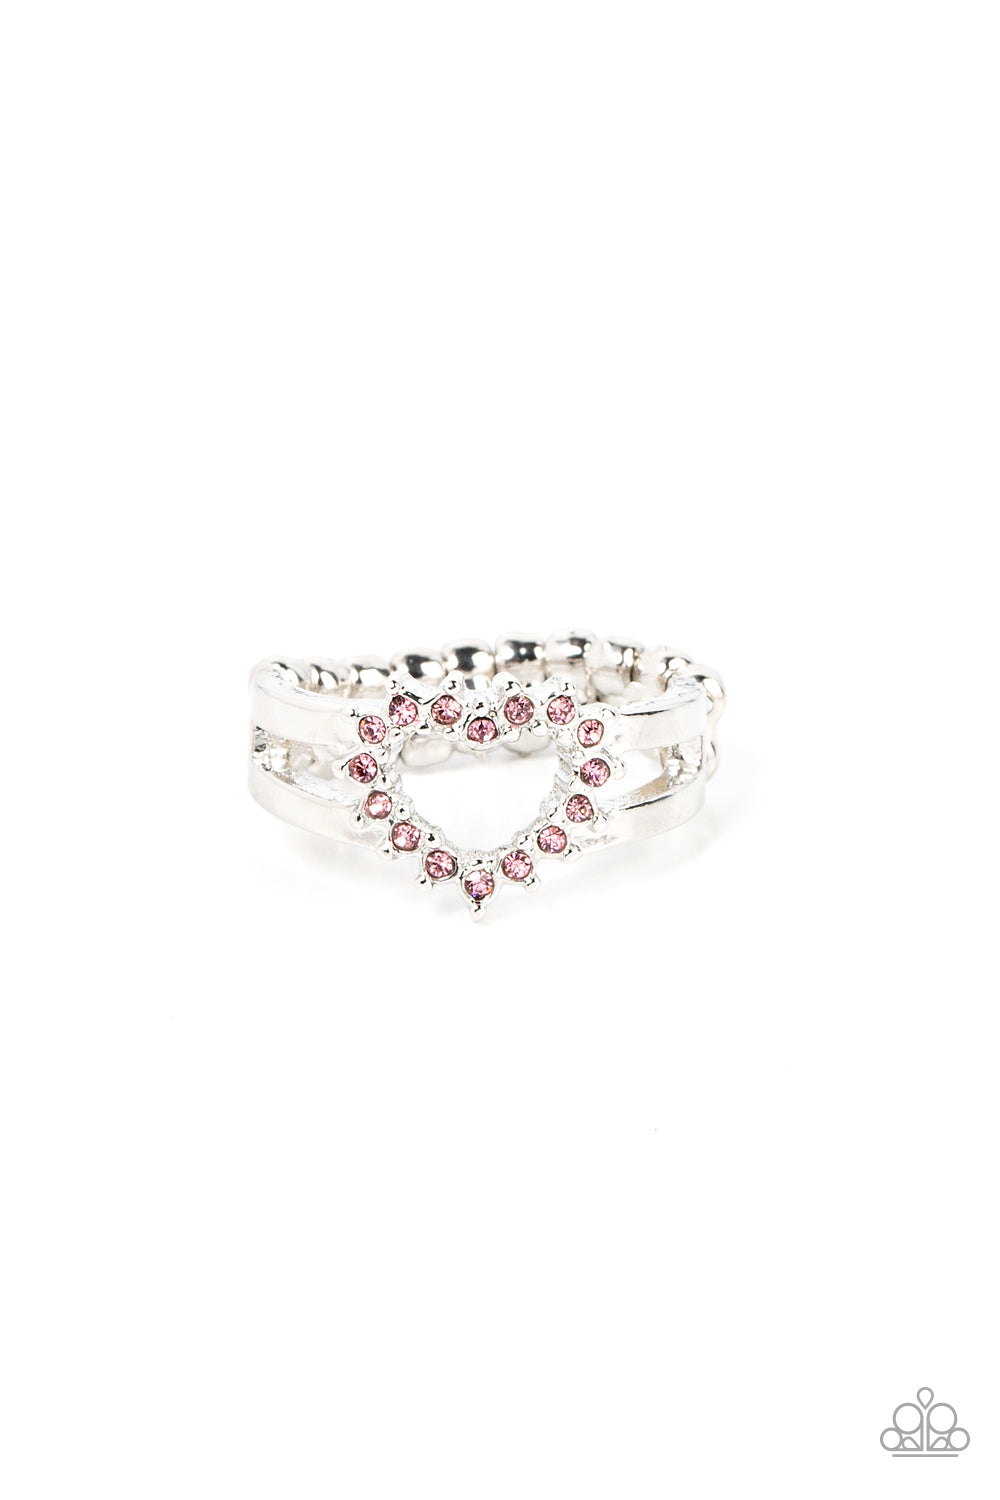 First Kisses Pink Heart Ring - Paparazzi Accessories  Pink rhinestone pronged silver fittings coalesce into an airy heart frame atop the center of layered silver frames, resulting in a romantic centerpiece atop the finger. Features a dainty stretchy band for a flexible fit.  Sold as one individual ring.